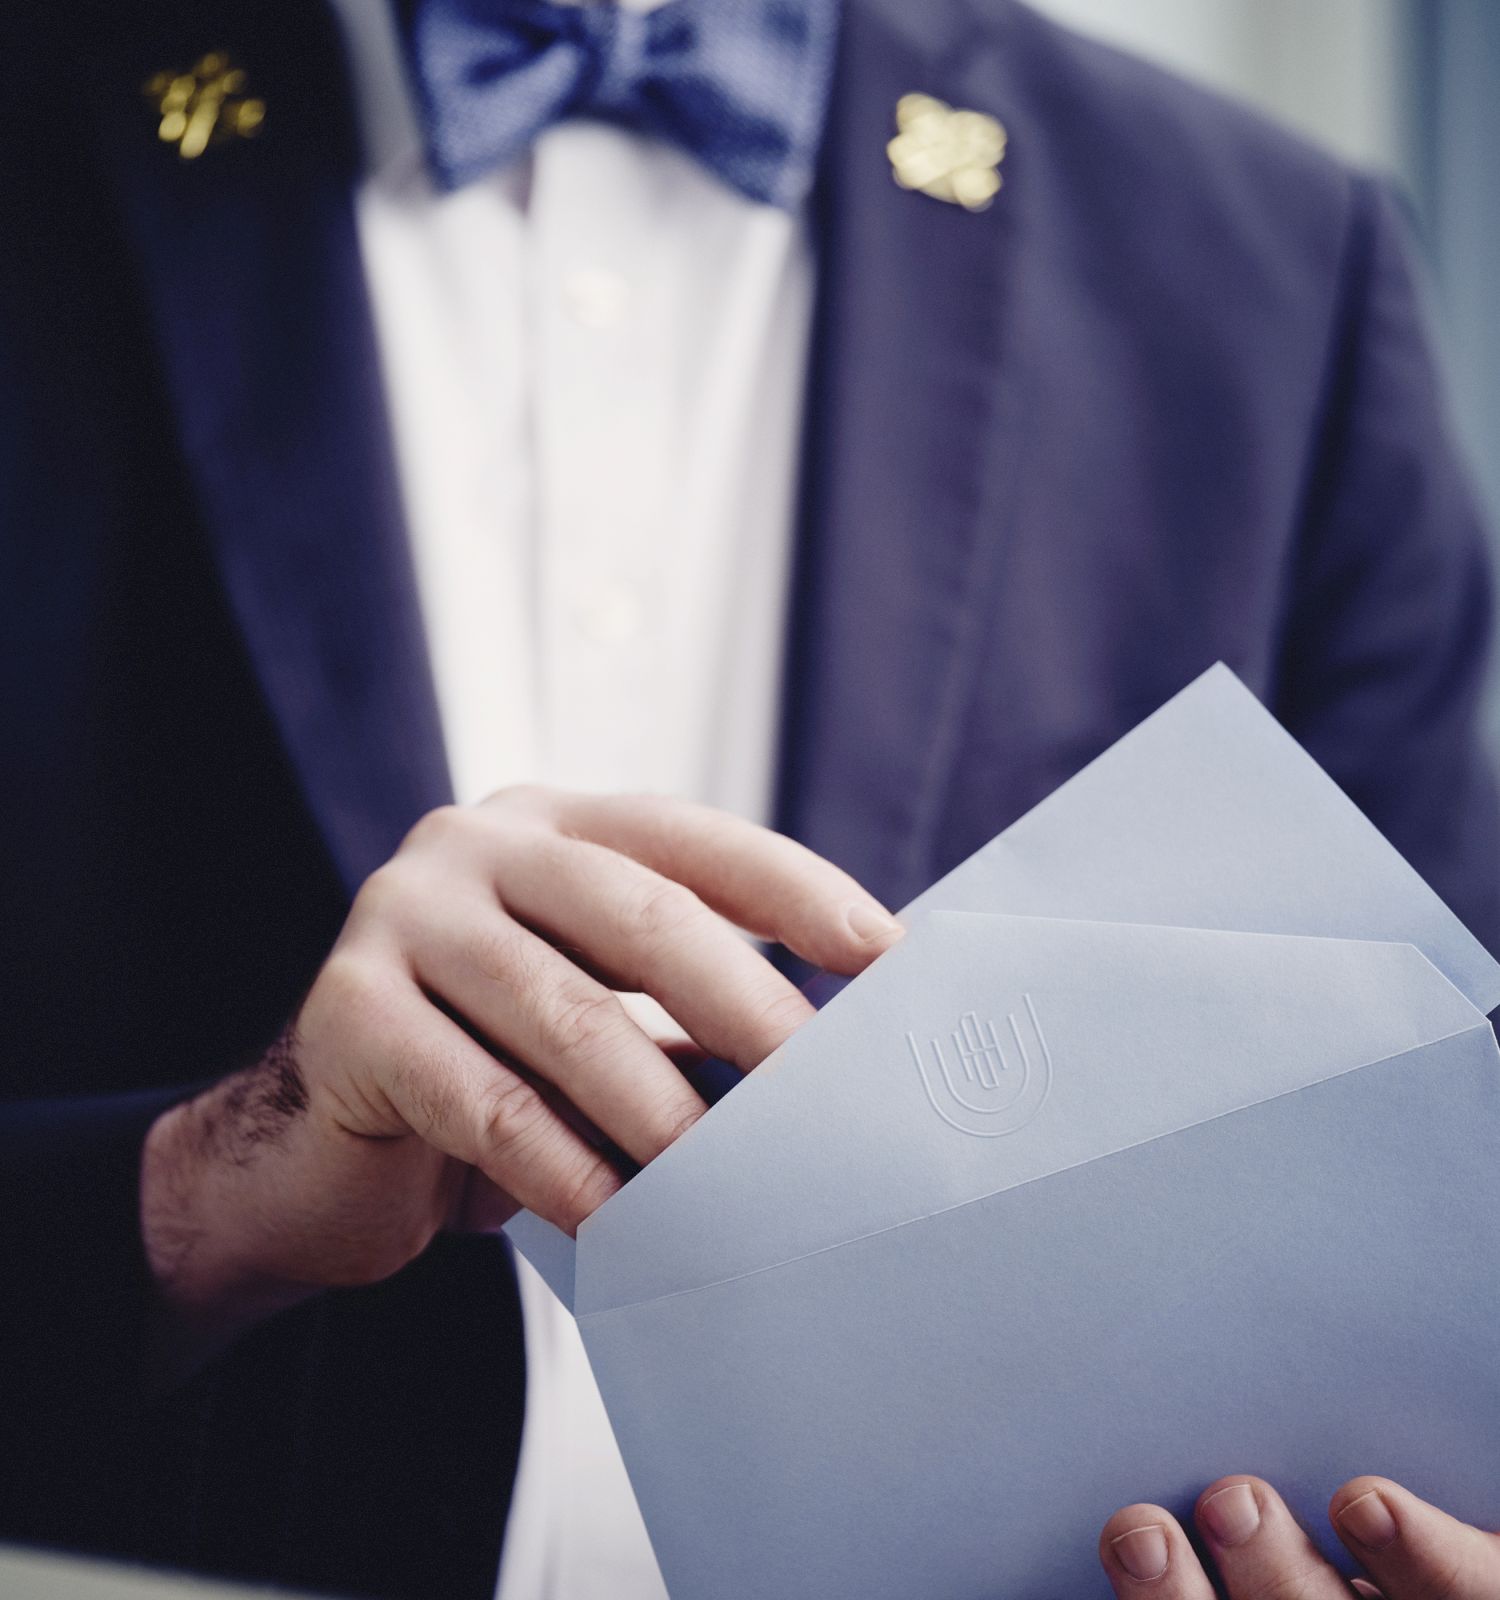 A person in a suit with a bow tie is holding an envelope.